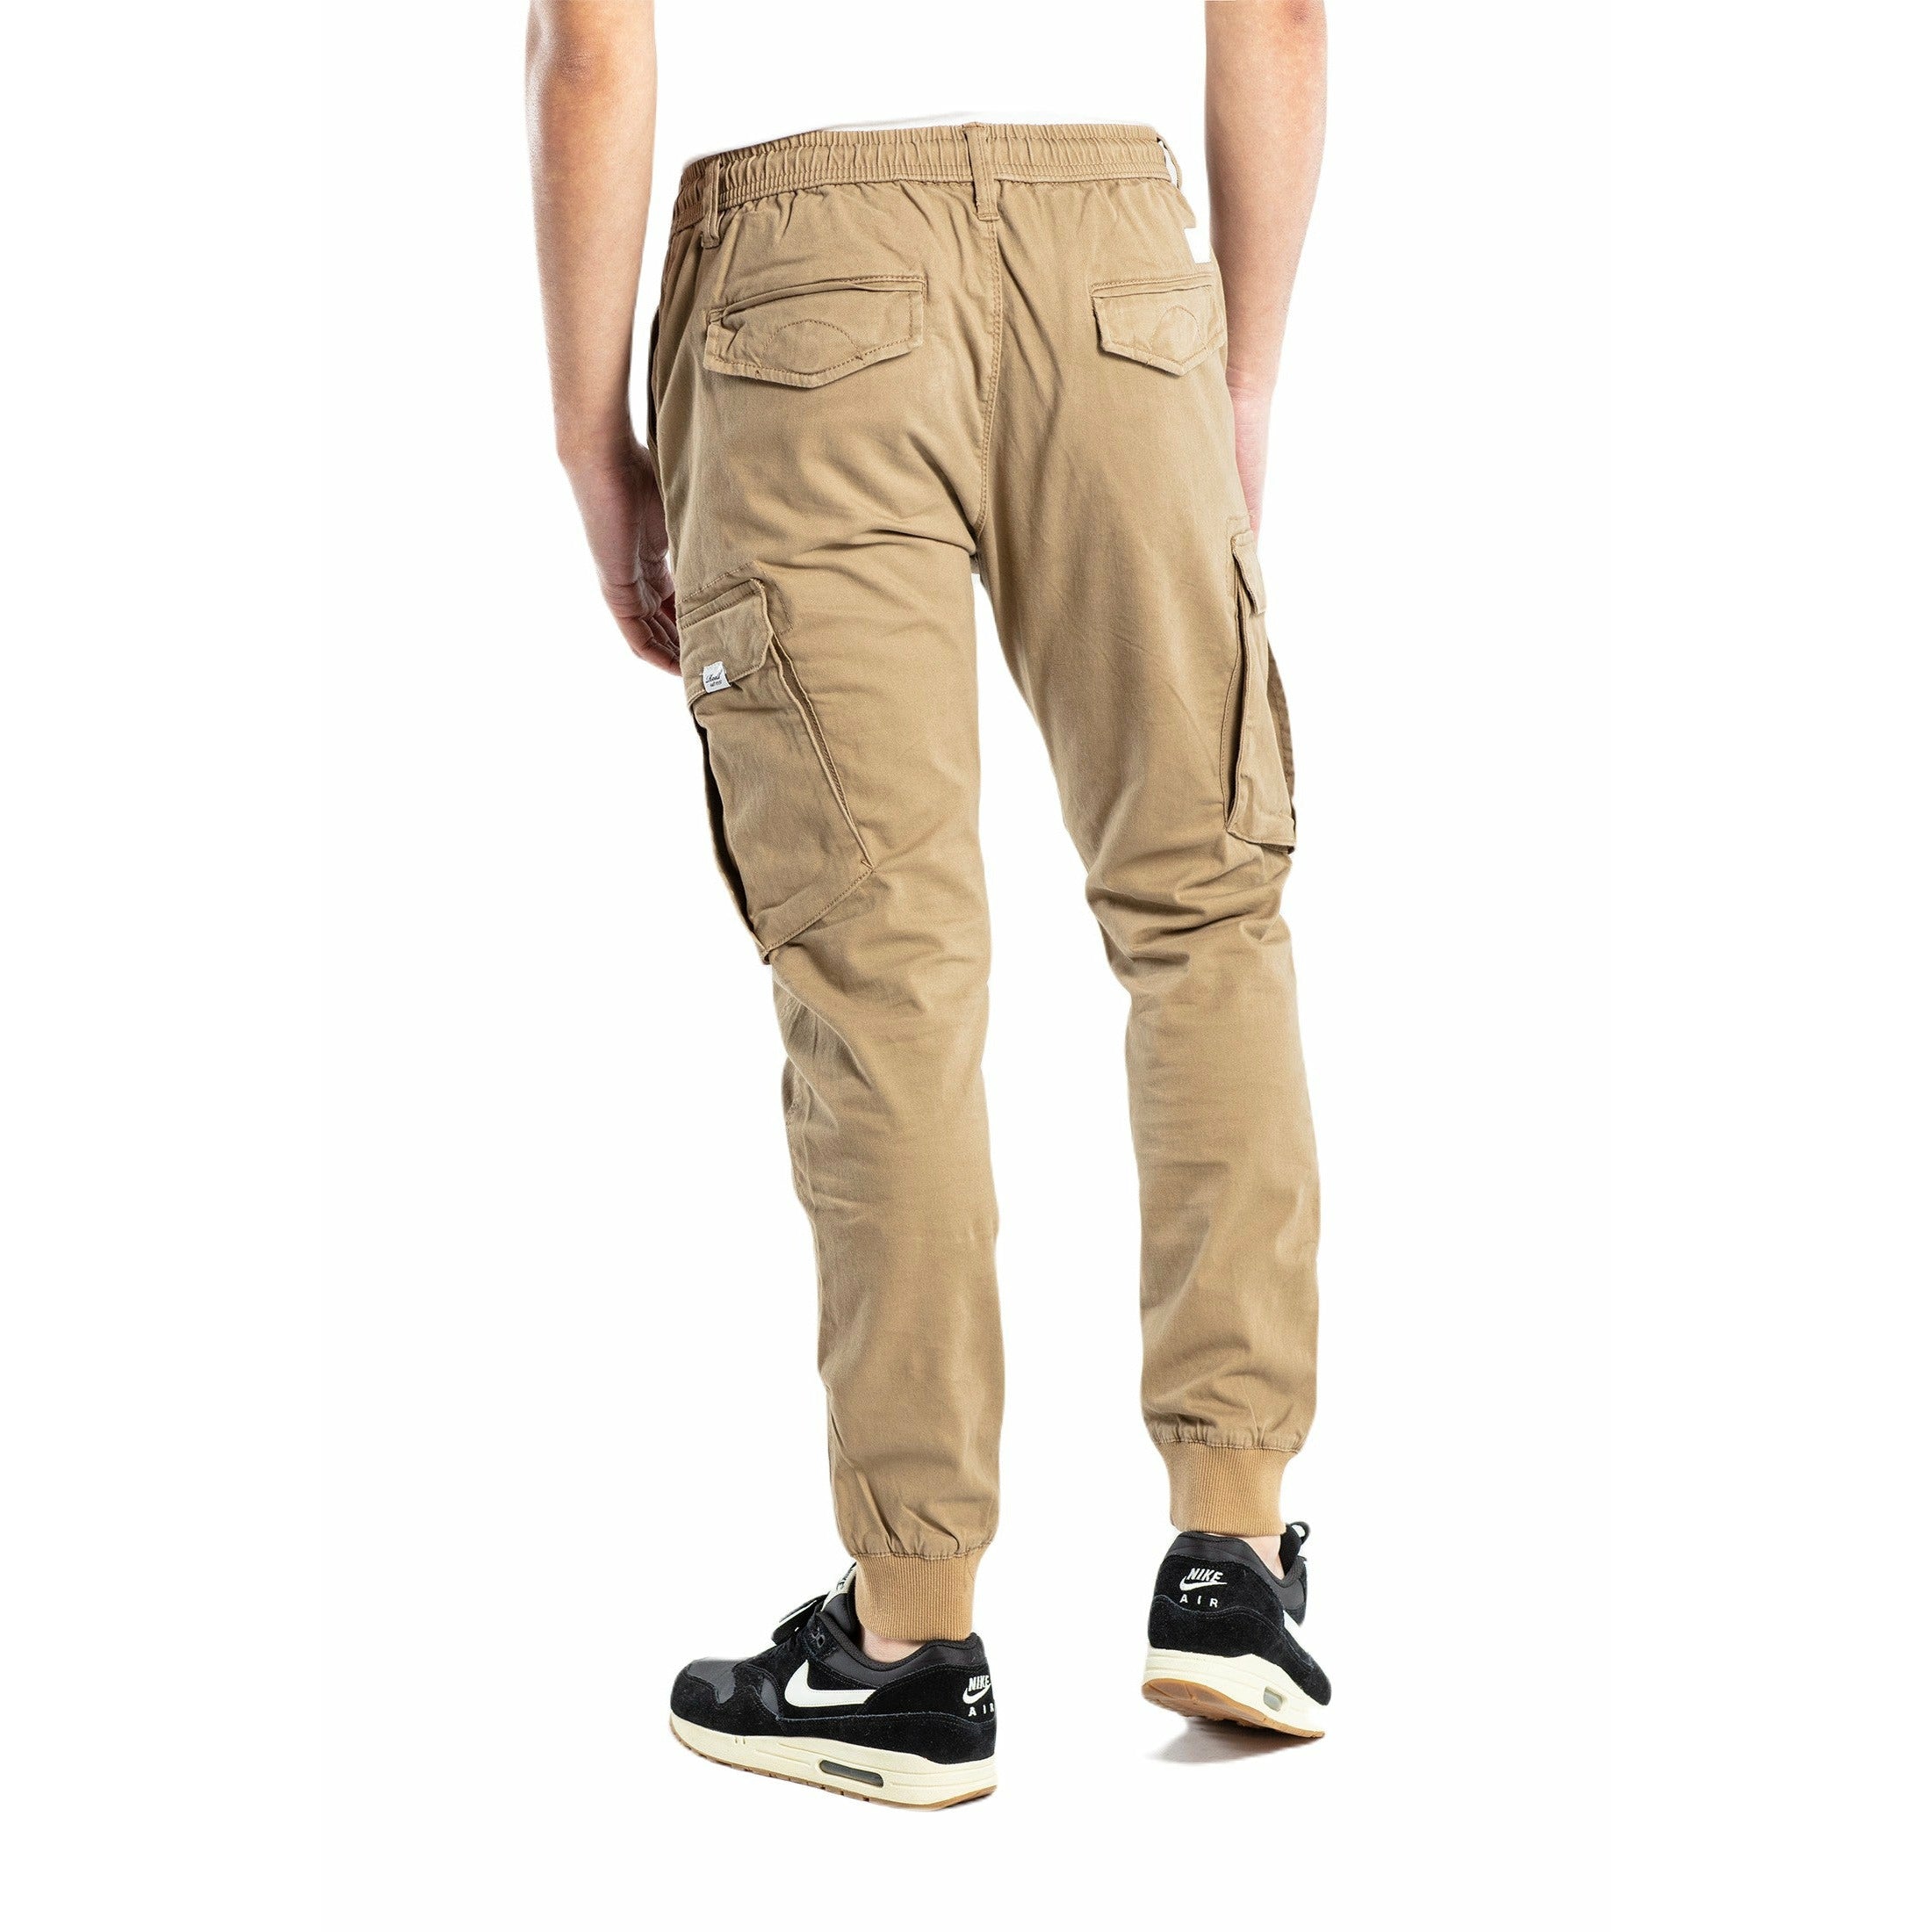 Want to buy REELL REFLEX RIB CARGO TROUSERS - DARK SAND? At The Old Man  Boardsports